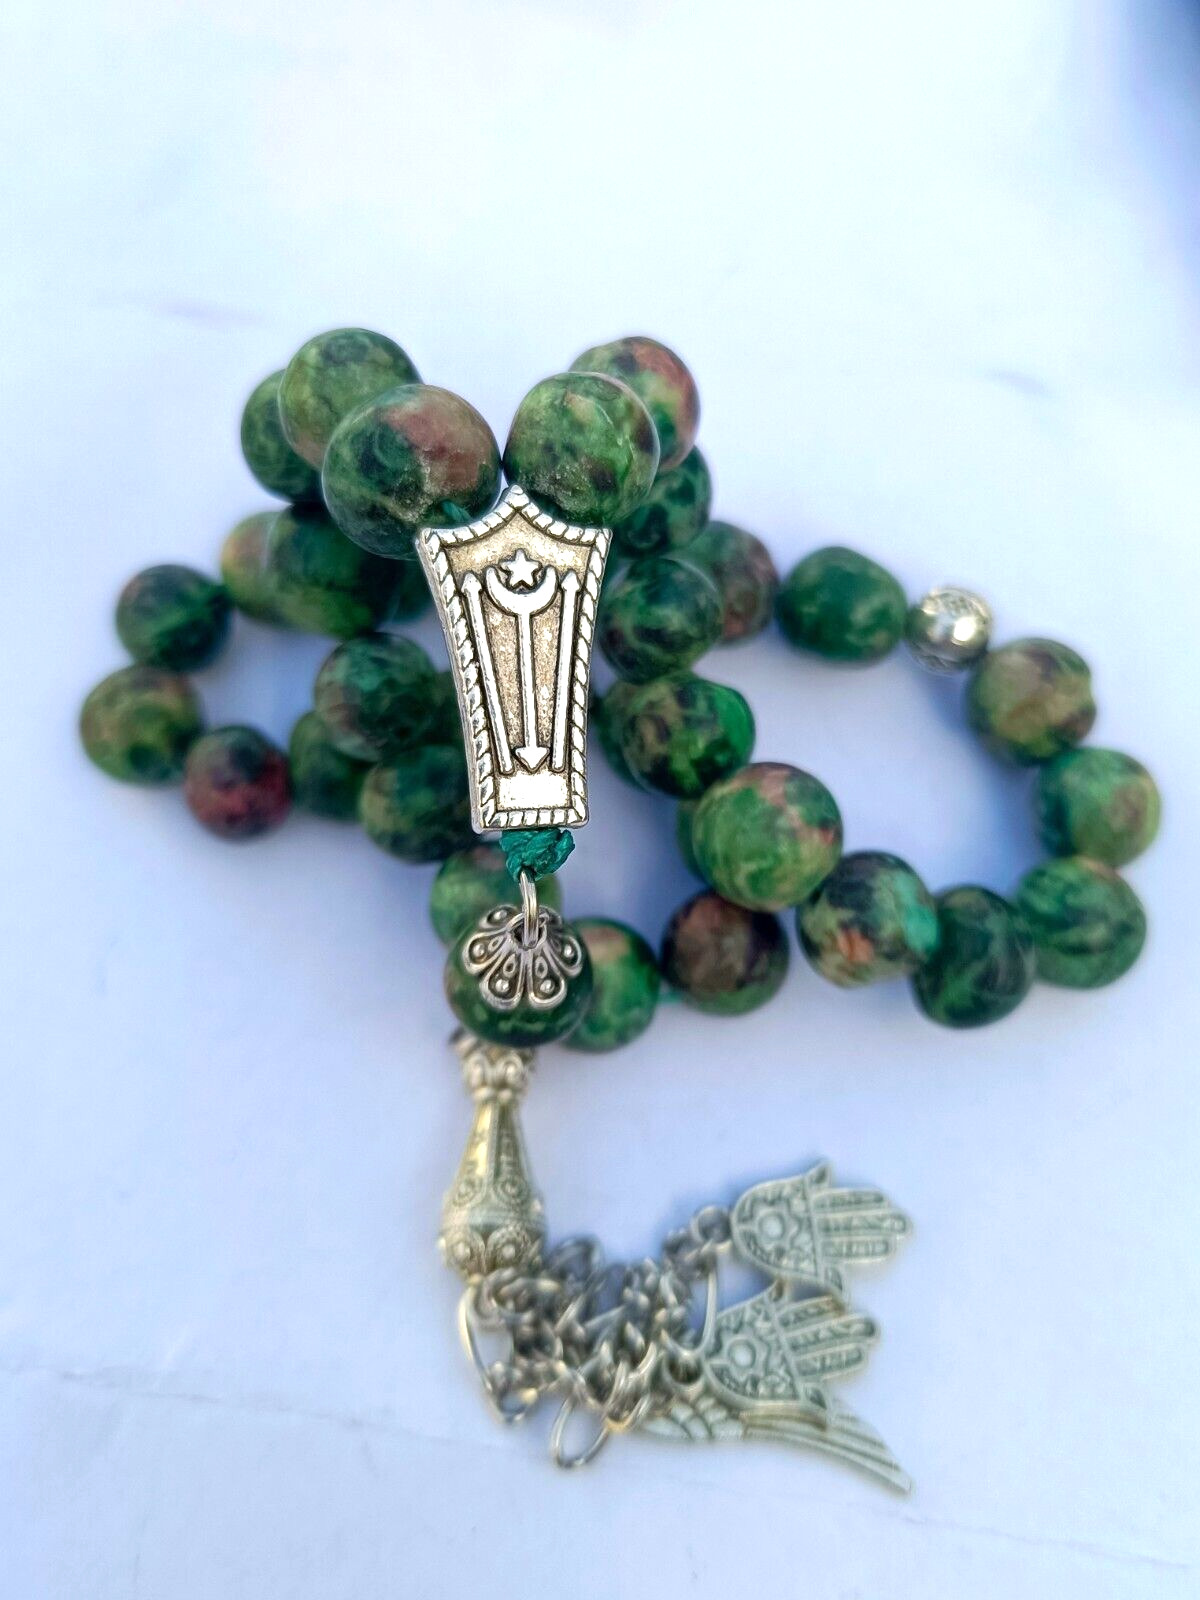 Rare Natural Green Fairouz Rosary Genuine Unevenly Cut 33 Stones Rosary New